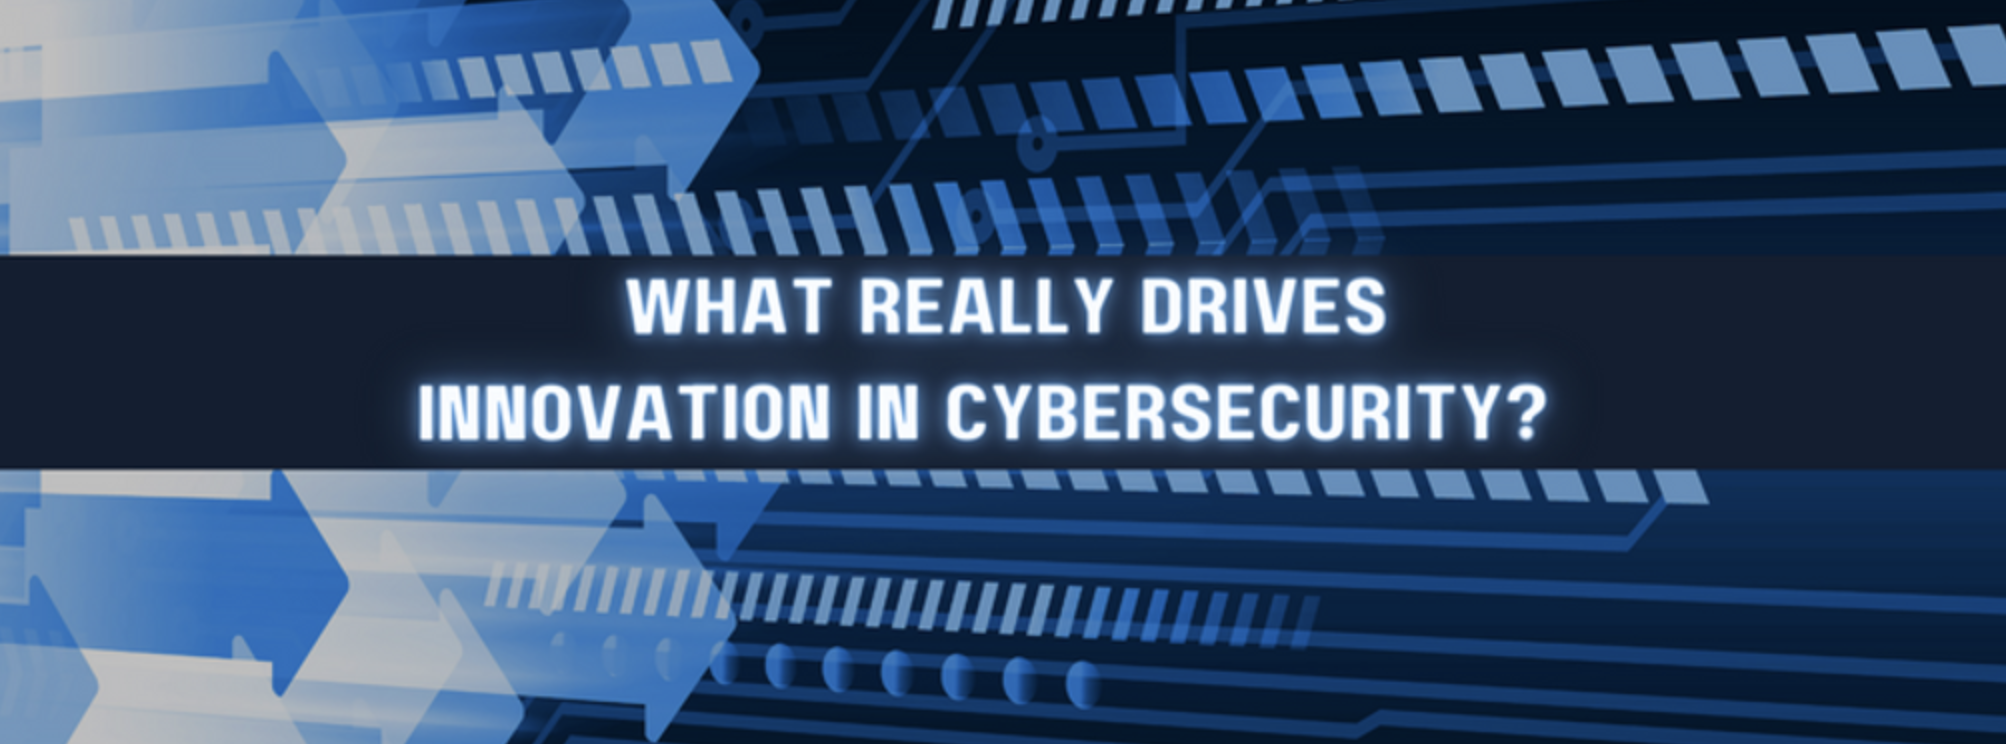 What Really Drives Innovation in Cybersecurity?